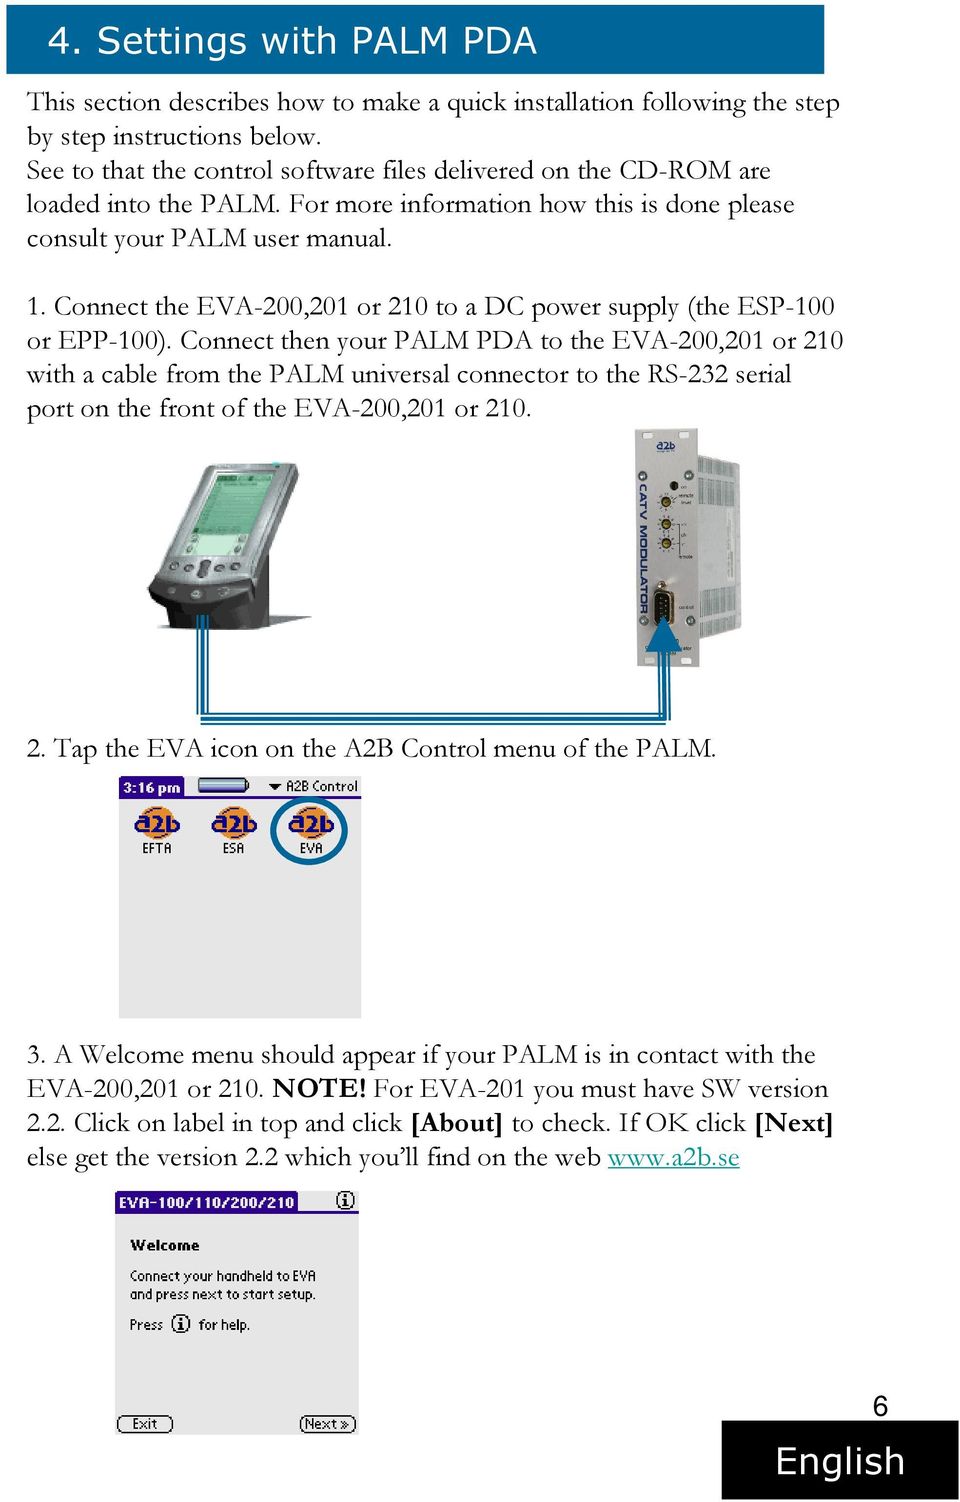 Connect the EVA-200,201 or 210 to a DC power supply (the ESP-100 or EPP-100).